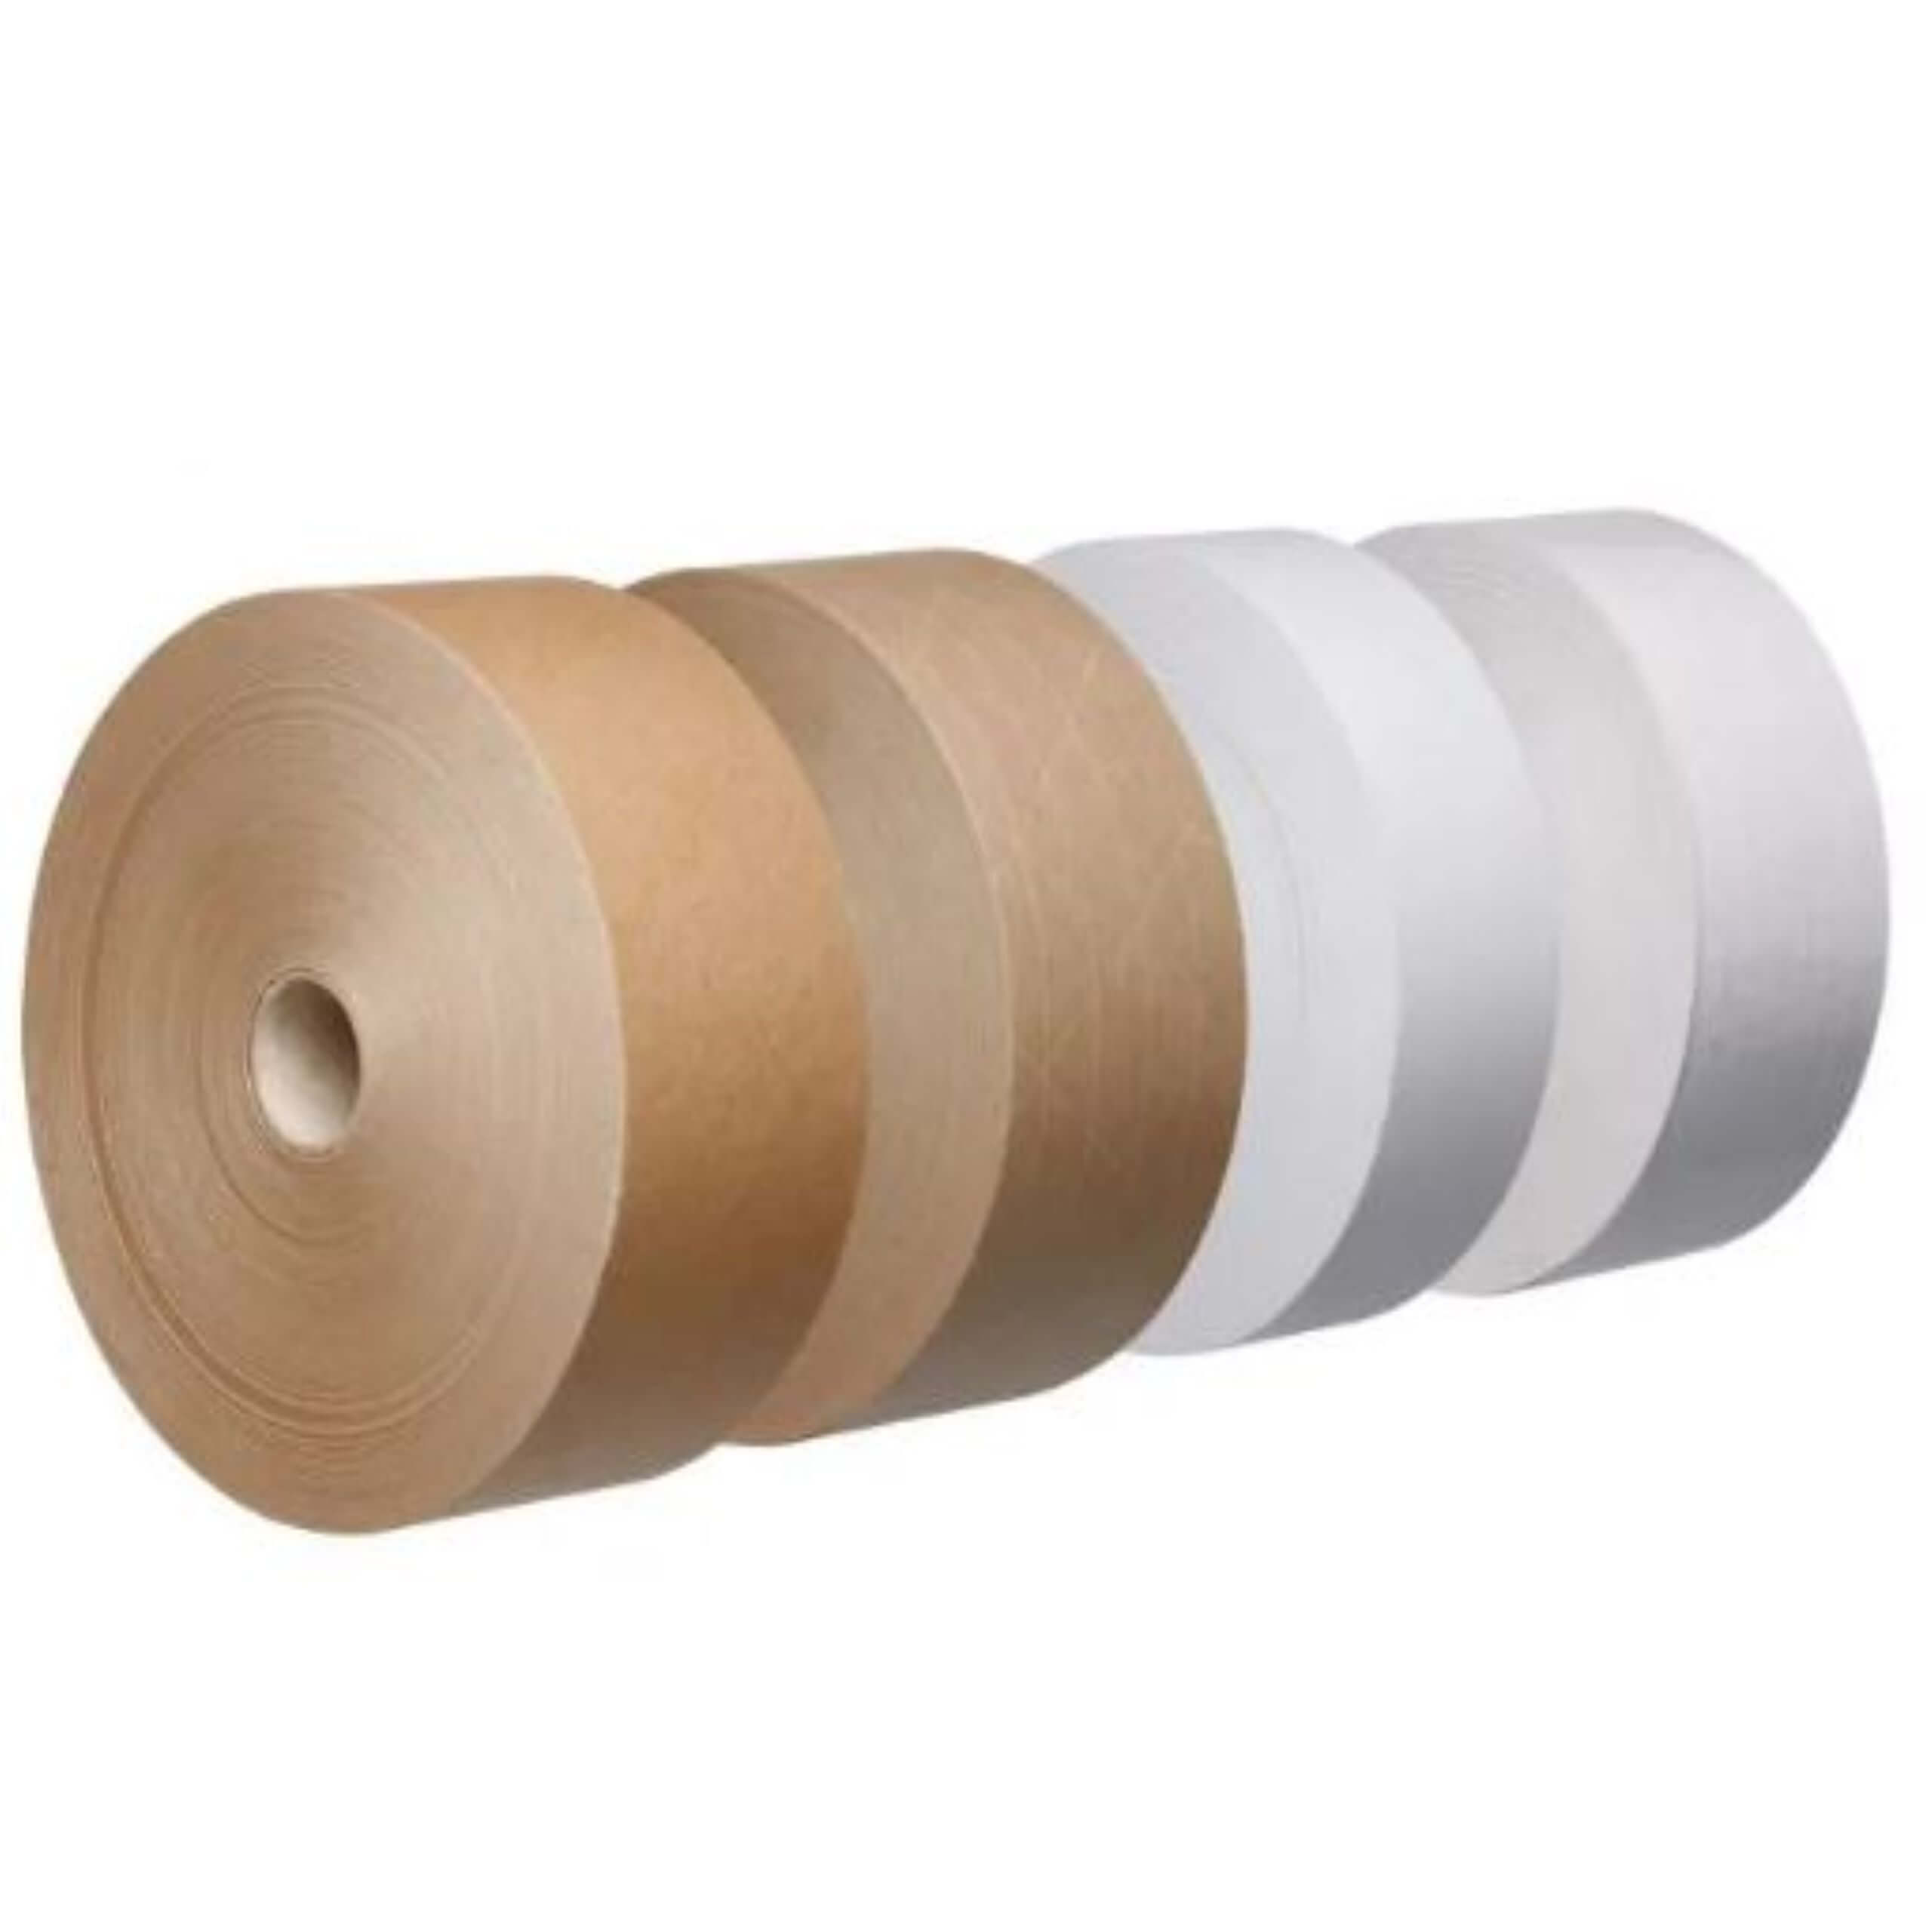 An image of our Paper Strapping.